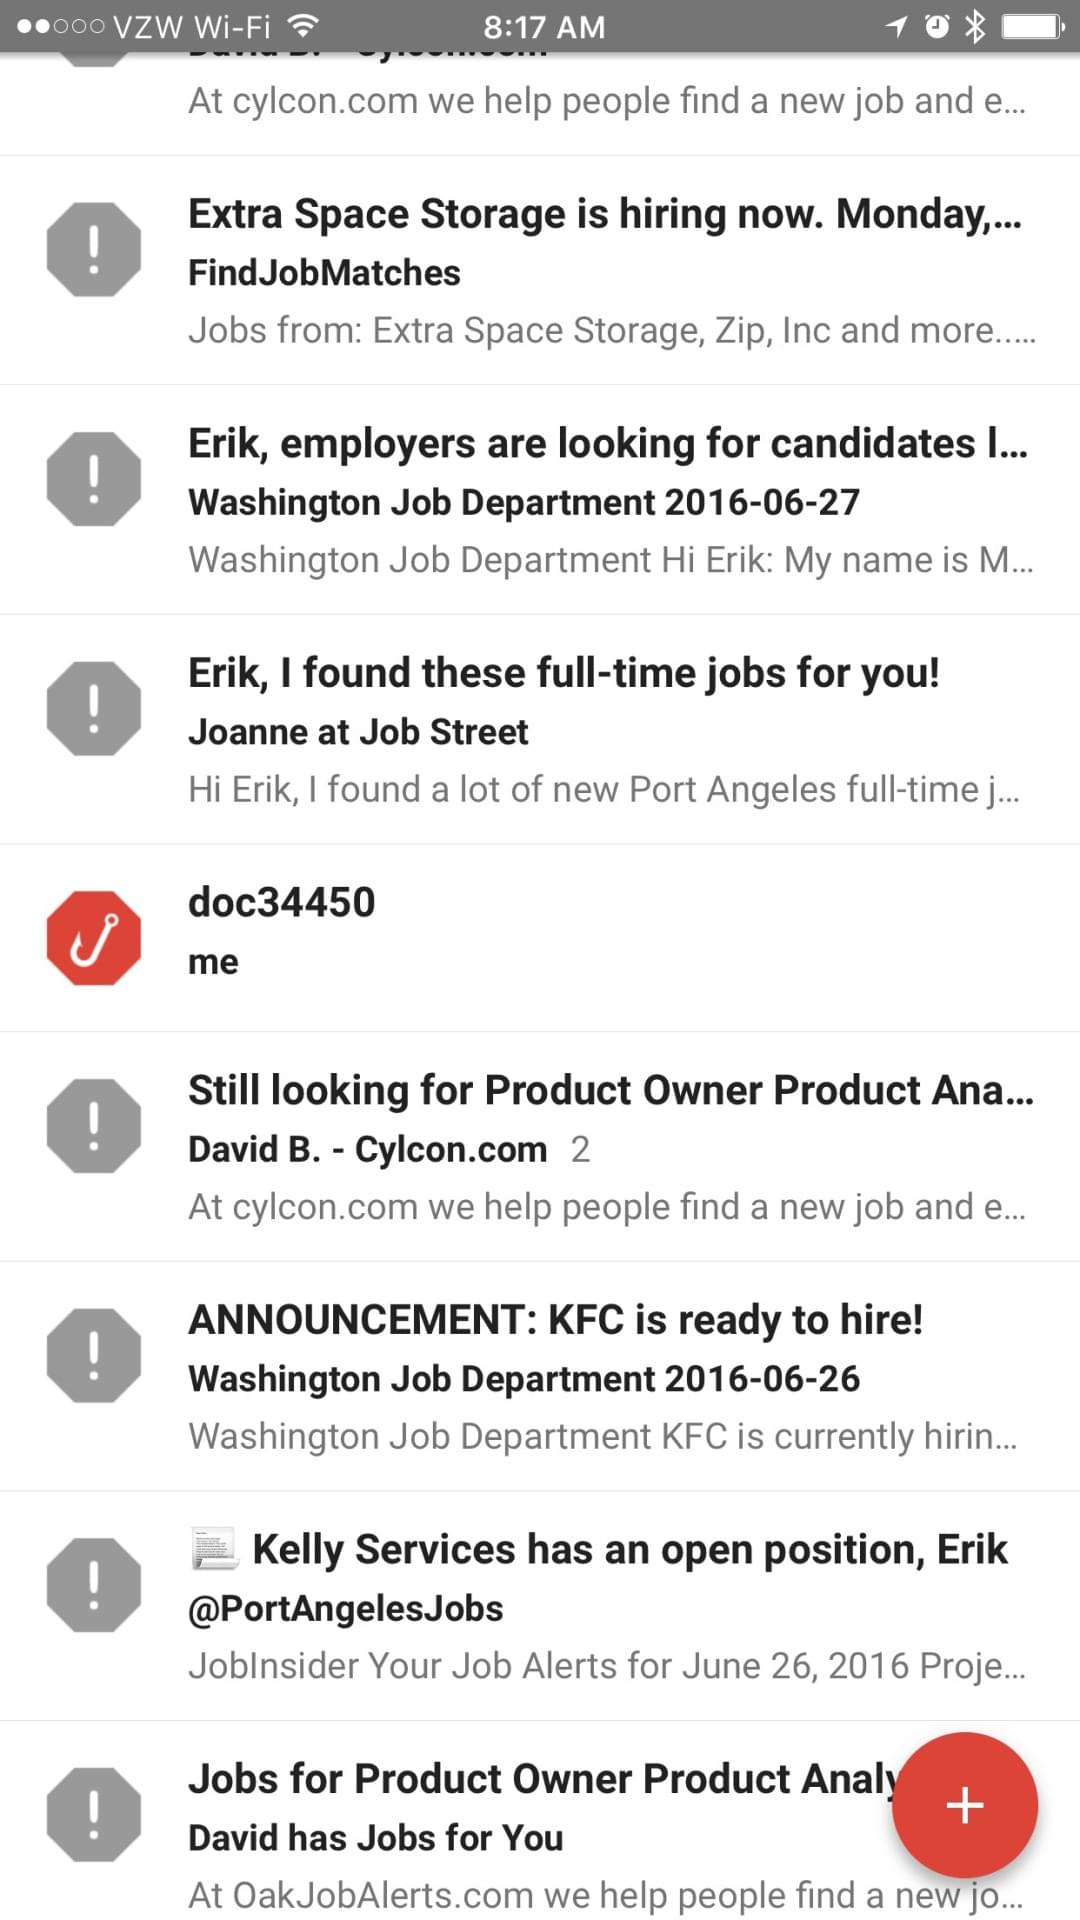 An email inbox with one email listed next to a fishing hook icon